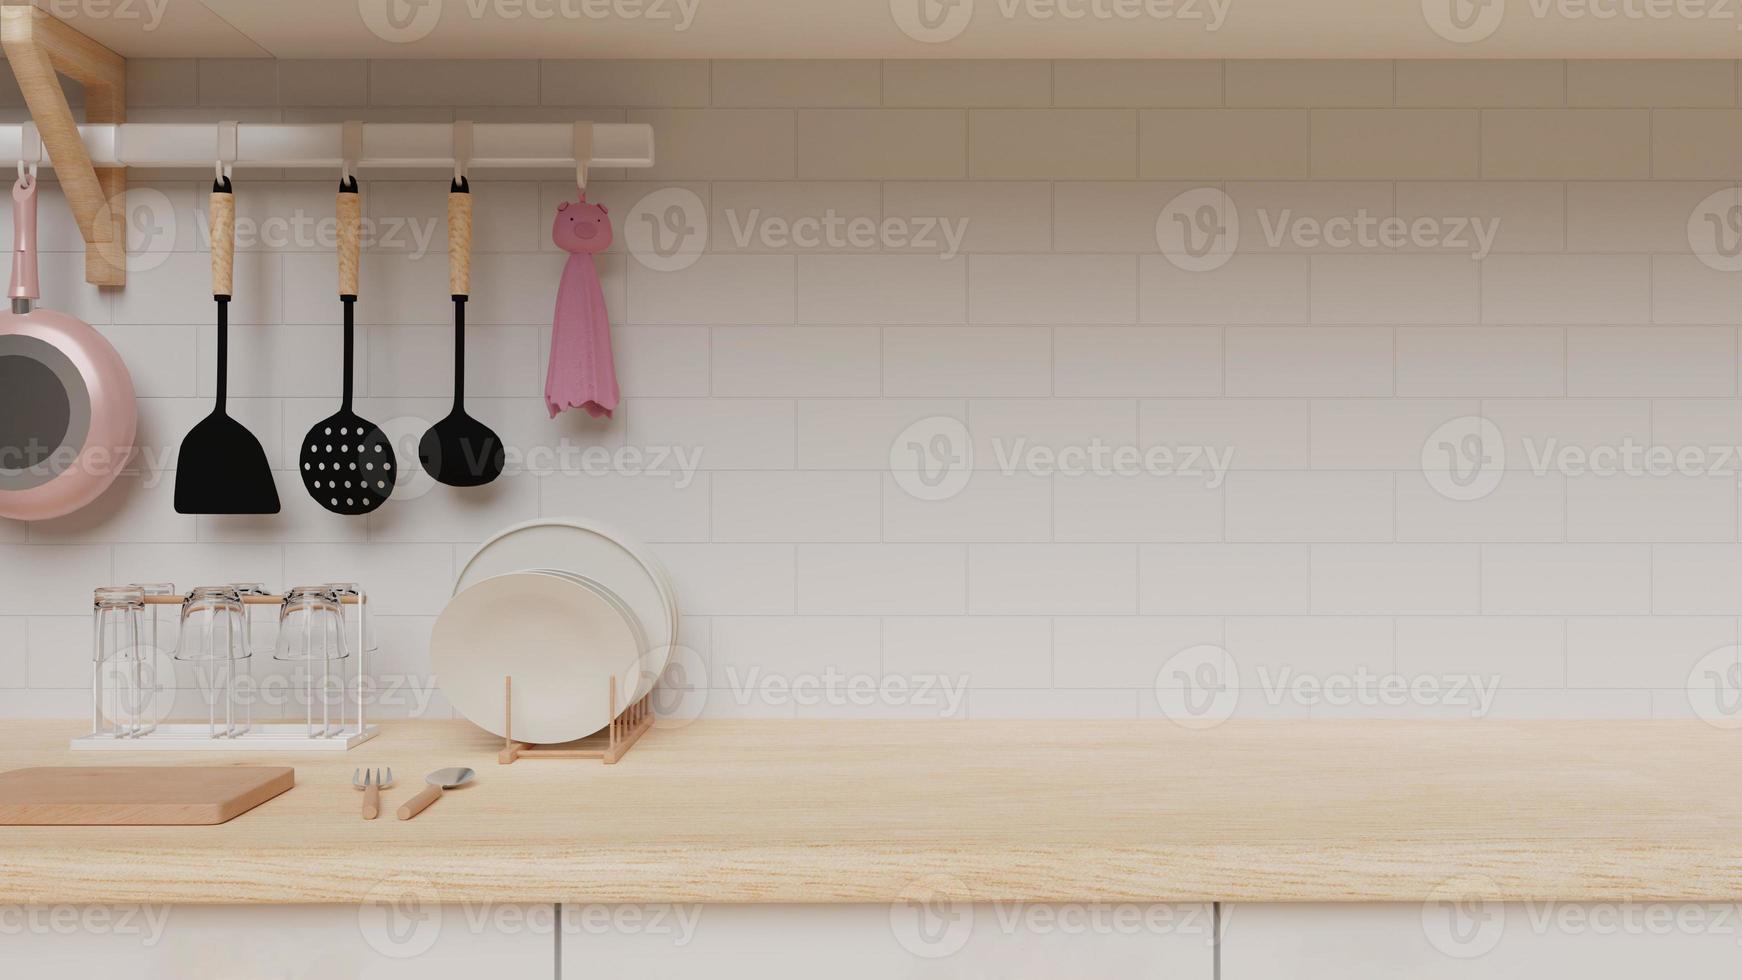 Cute kitchen counter background with wood top, brick wall, pink pan, glass, white plate. Cozy aesthetic. 3d render. photo